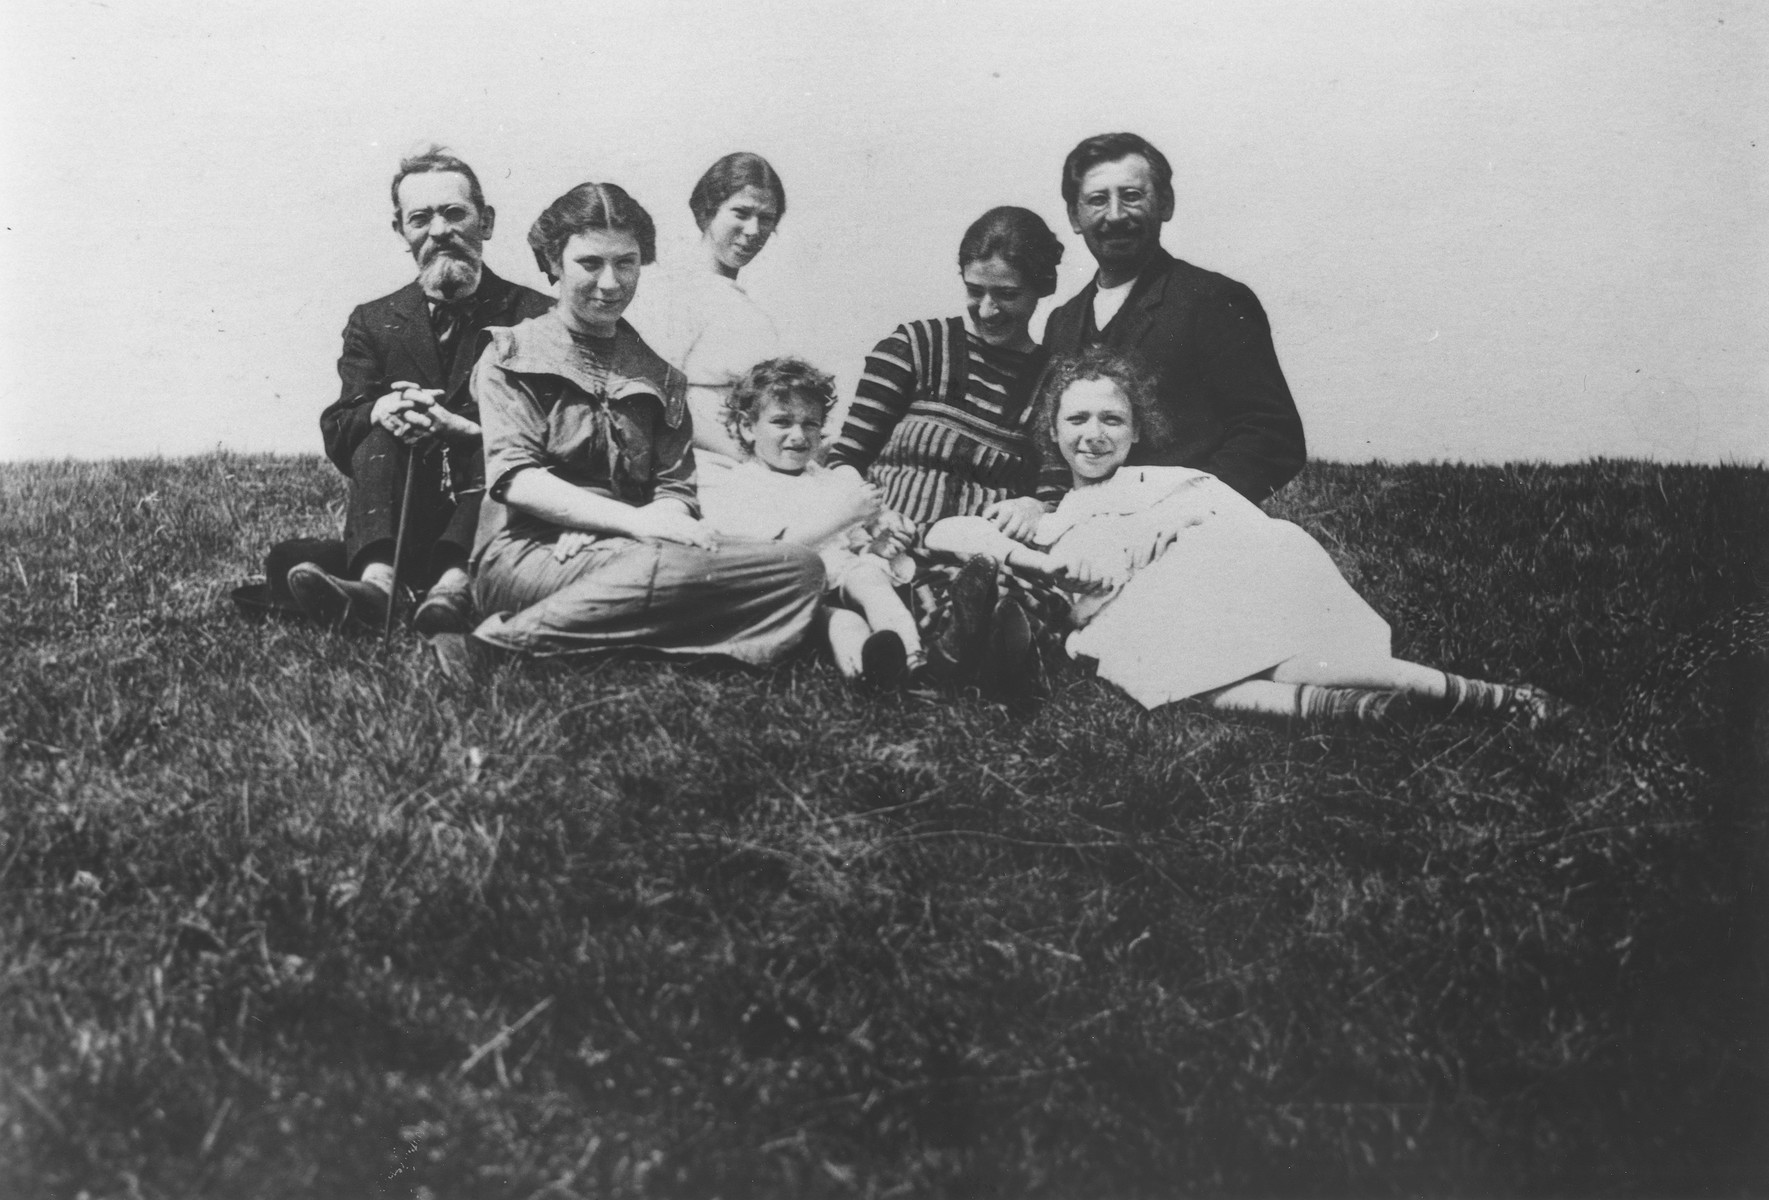 Group portrait of the Mikolaevsky family at their dacha in the village of Strelna, a suburb of St. Petersburg.